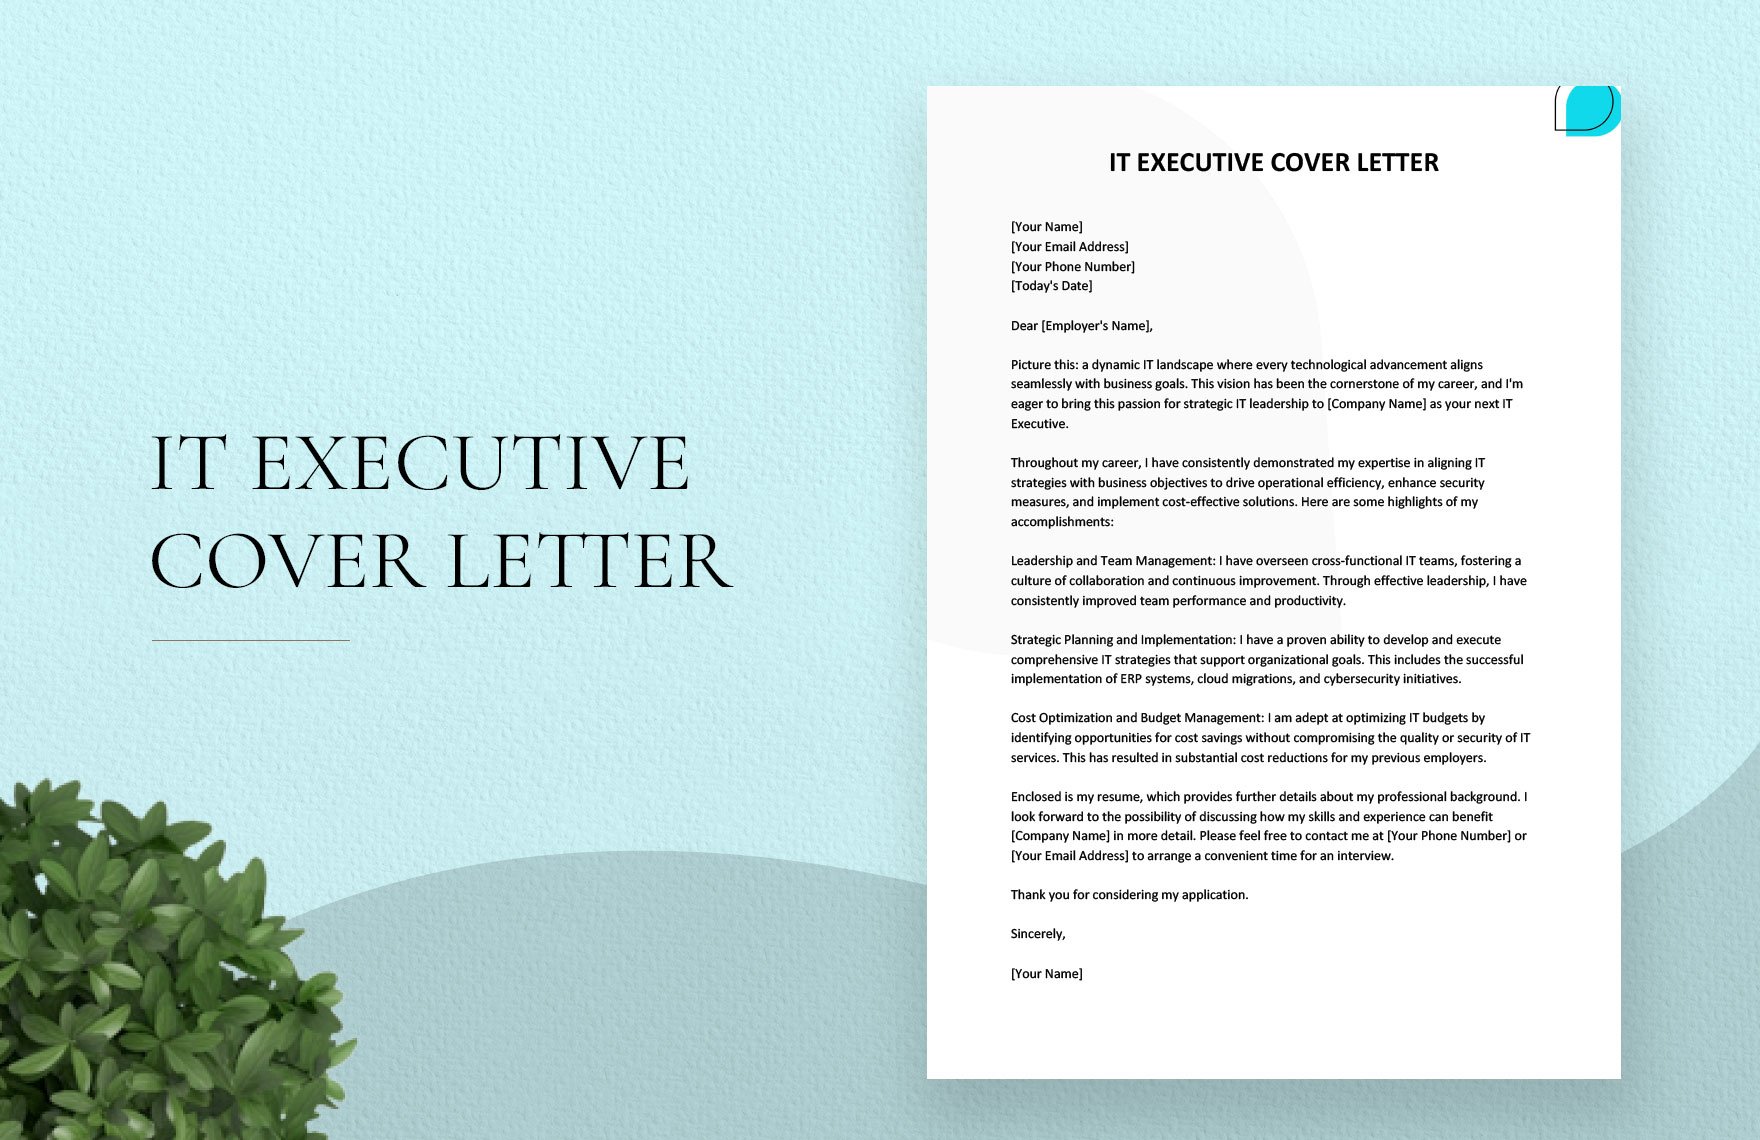 IT Executive Cover Letter